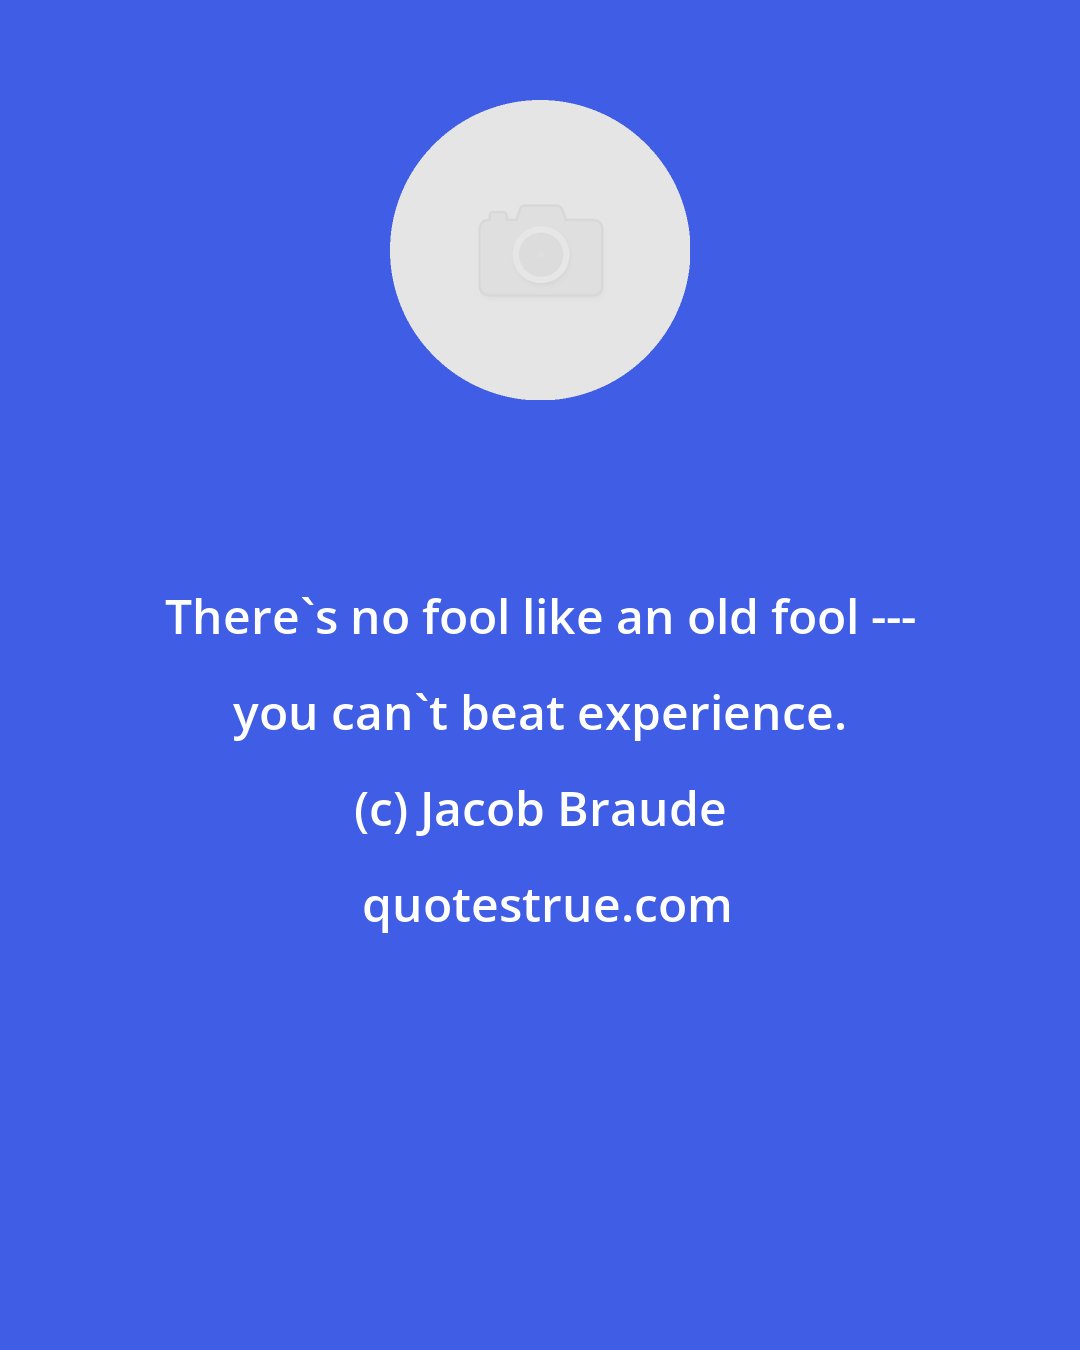 Jacob Braude: There's no fool like an old fool --- you can't beat experience.